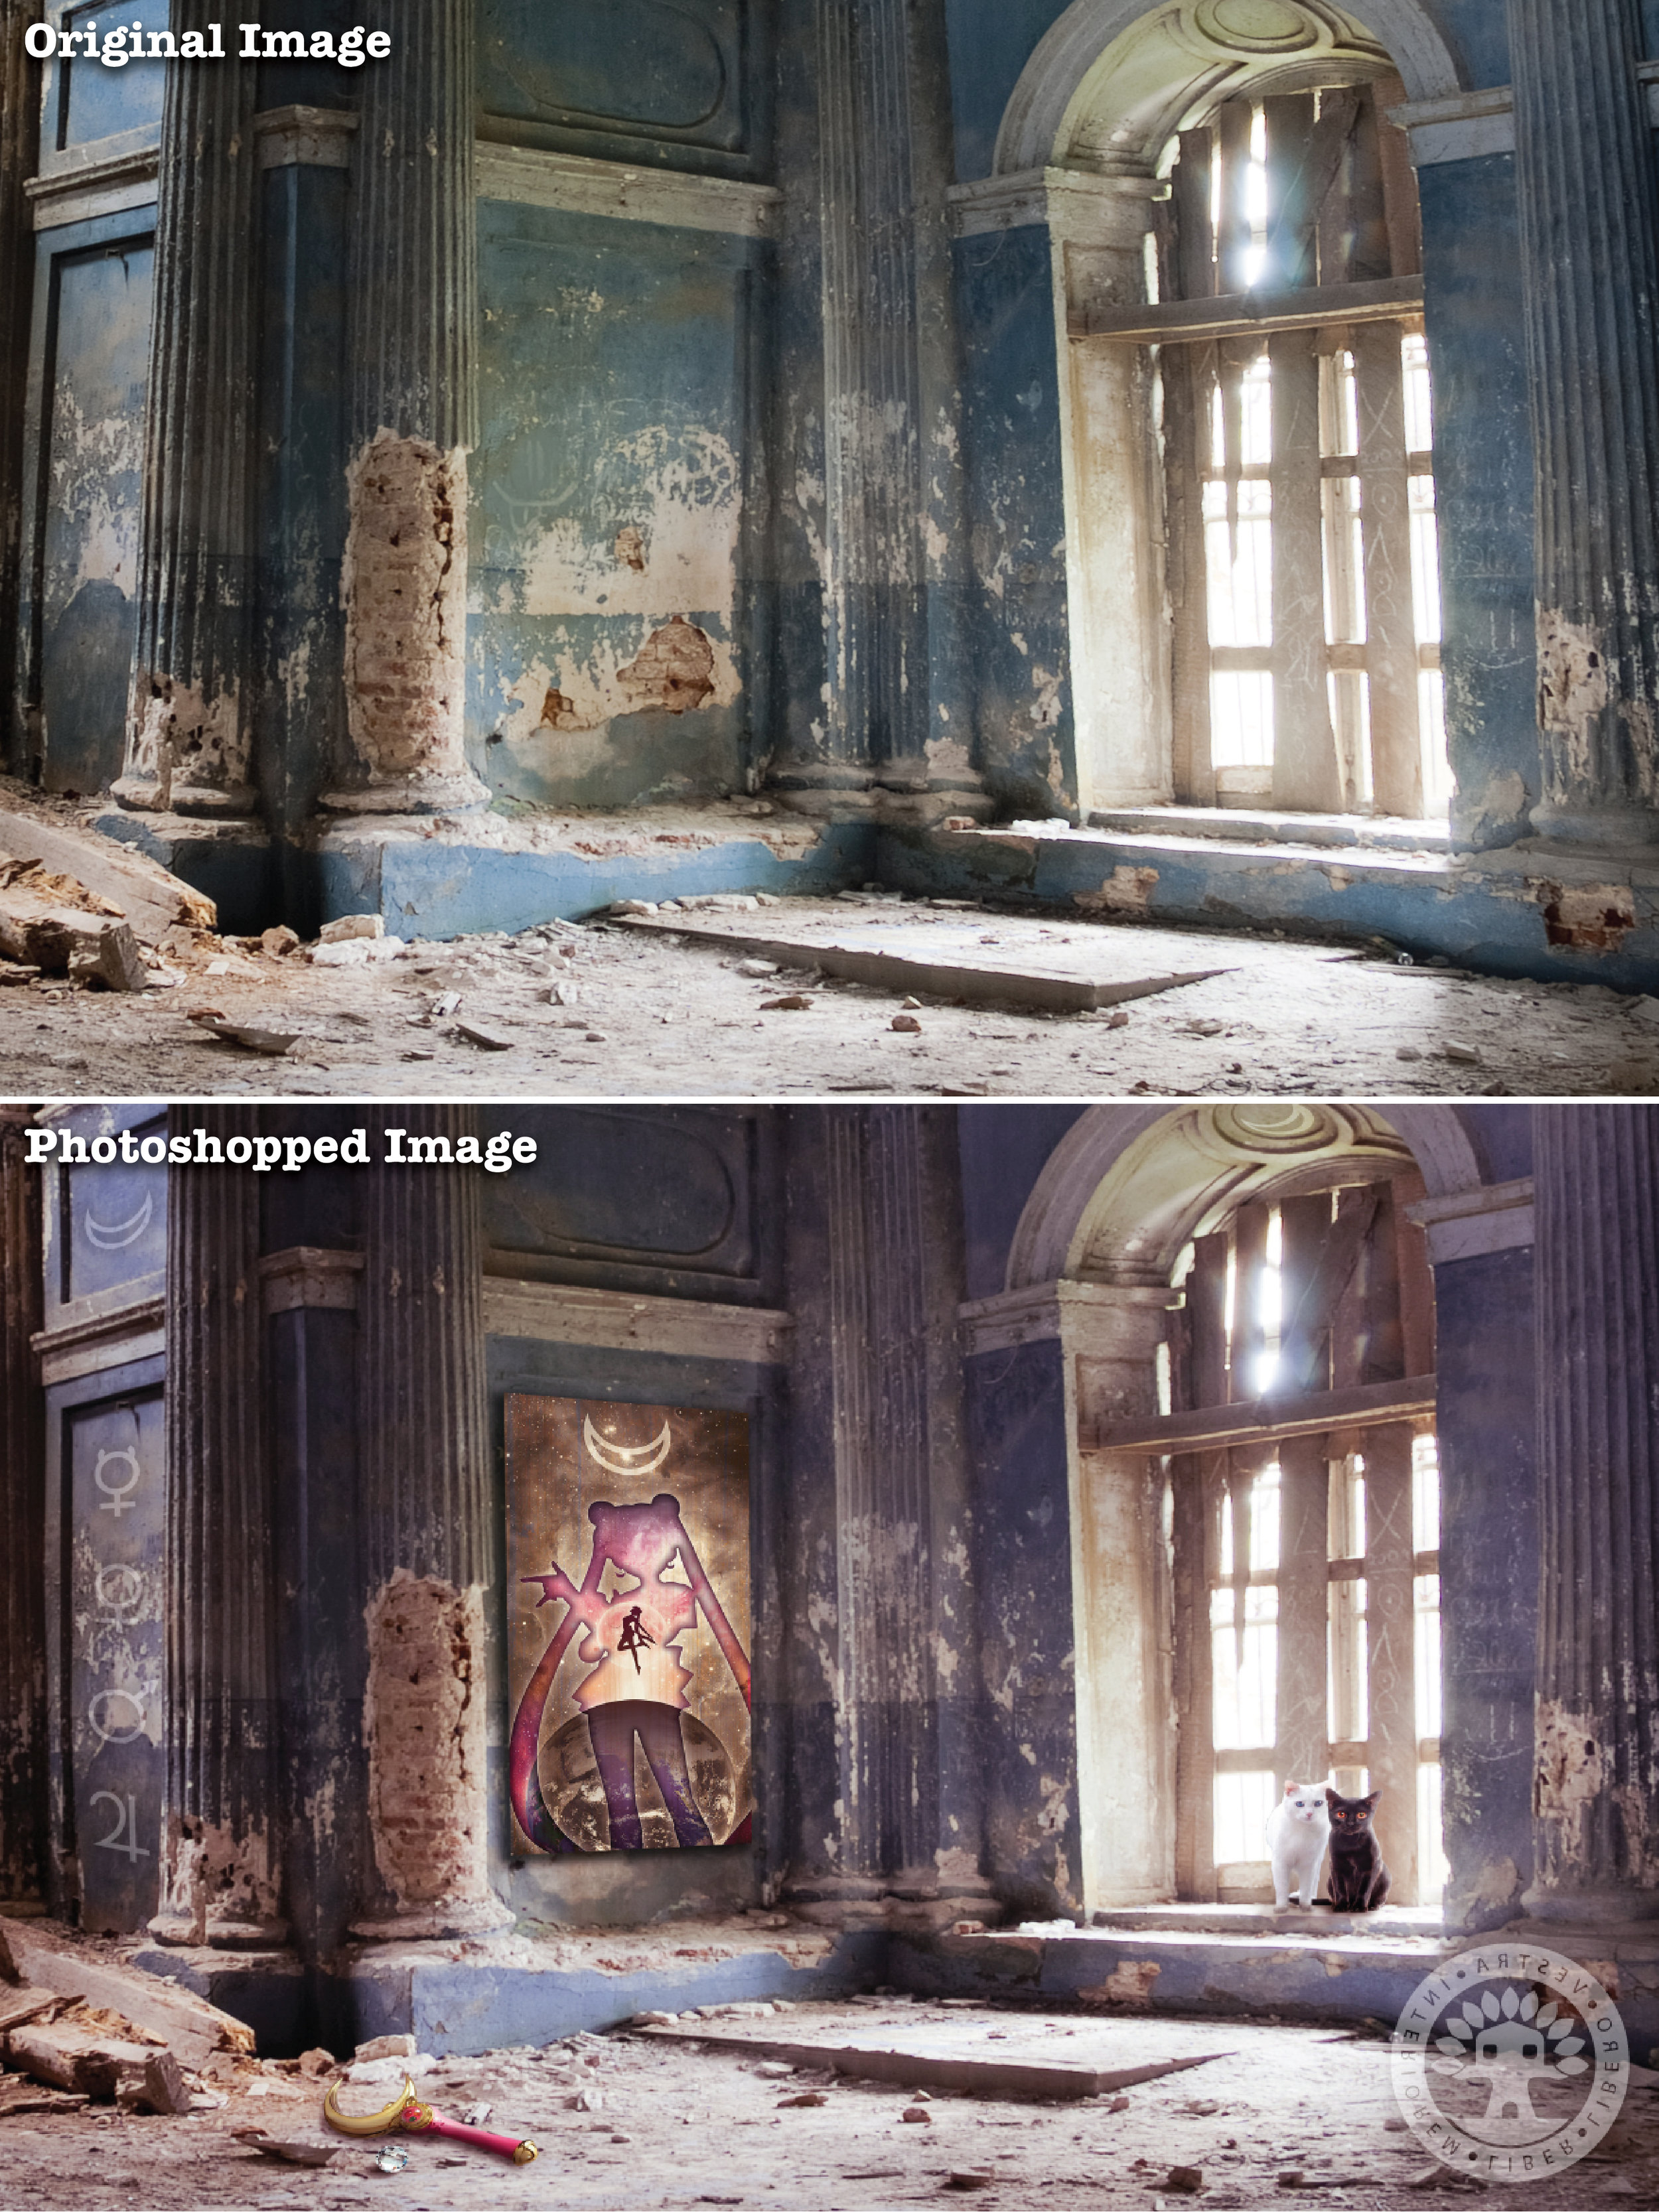 "Moon Kingdom Ruins" before and after Photoshop . ~ Corinne Jade, ClubHouse Collective